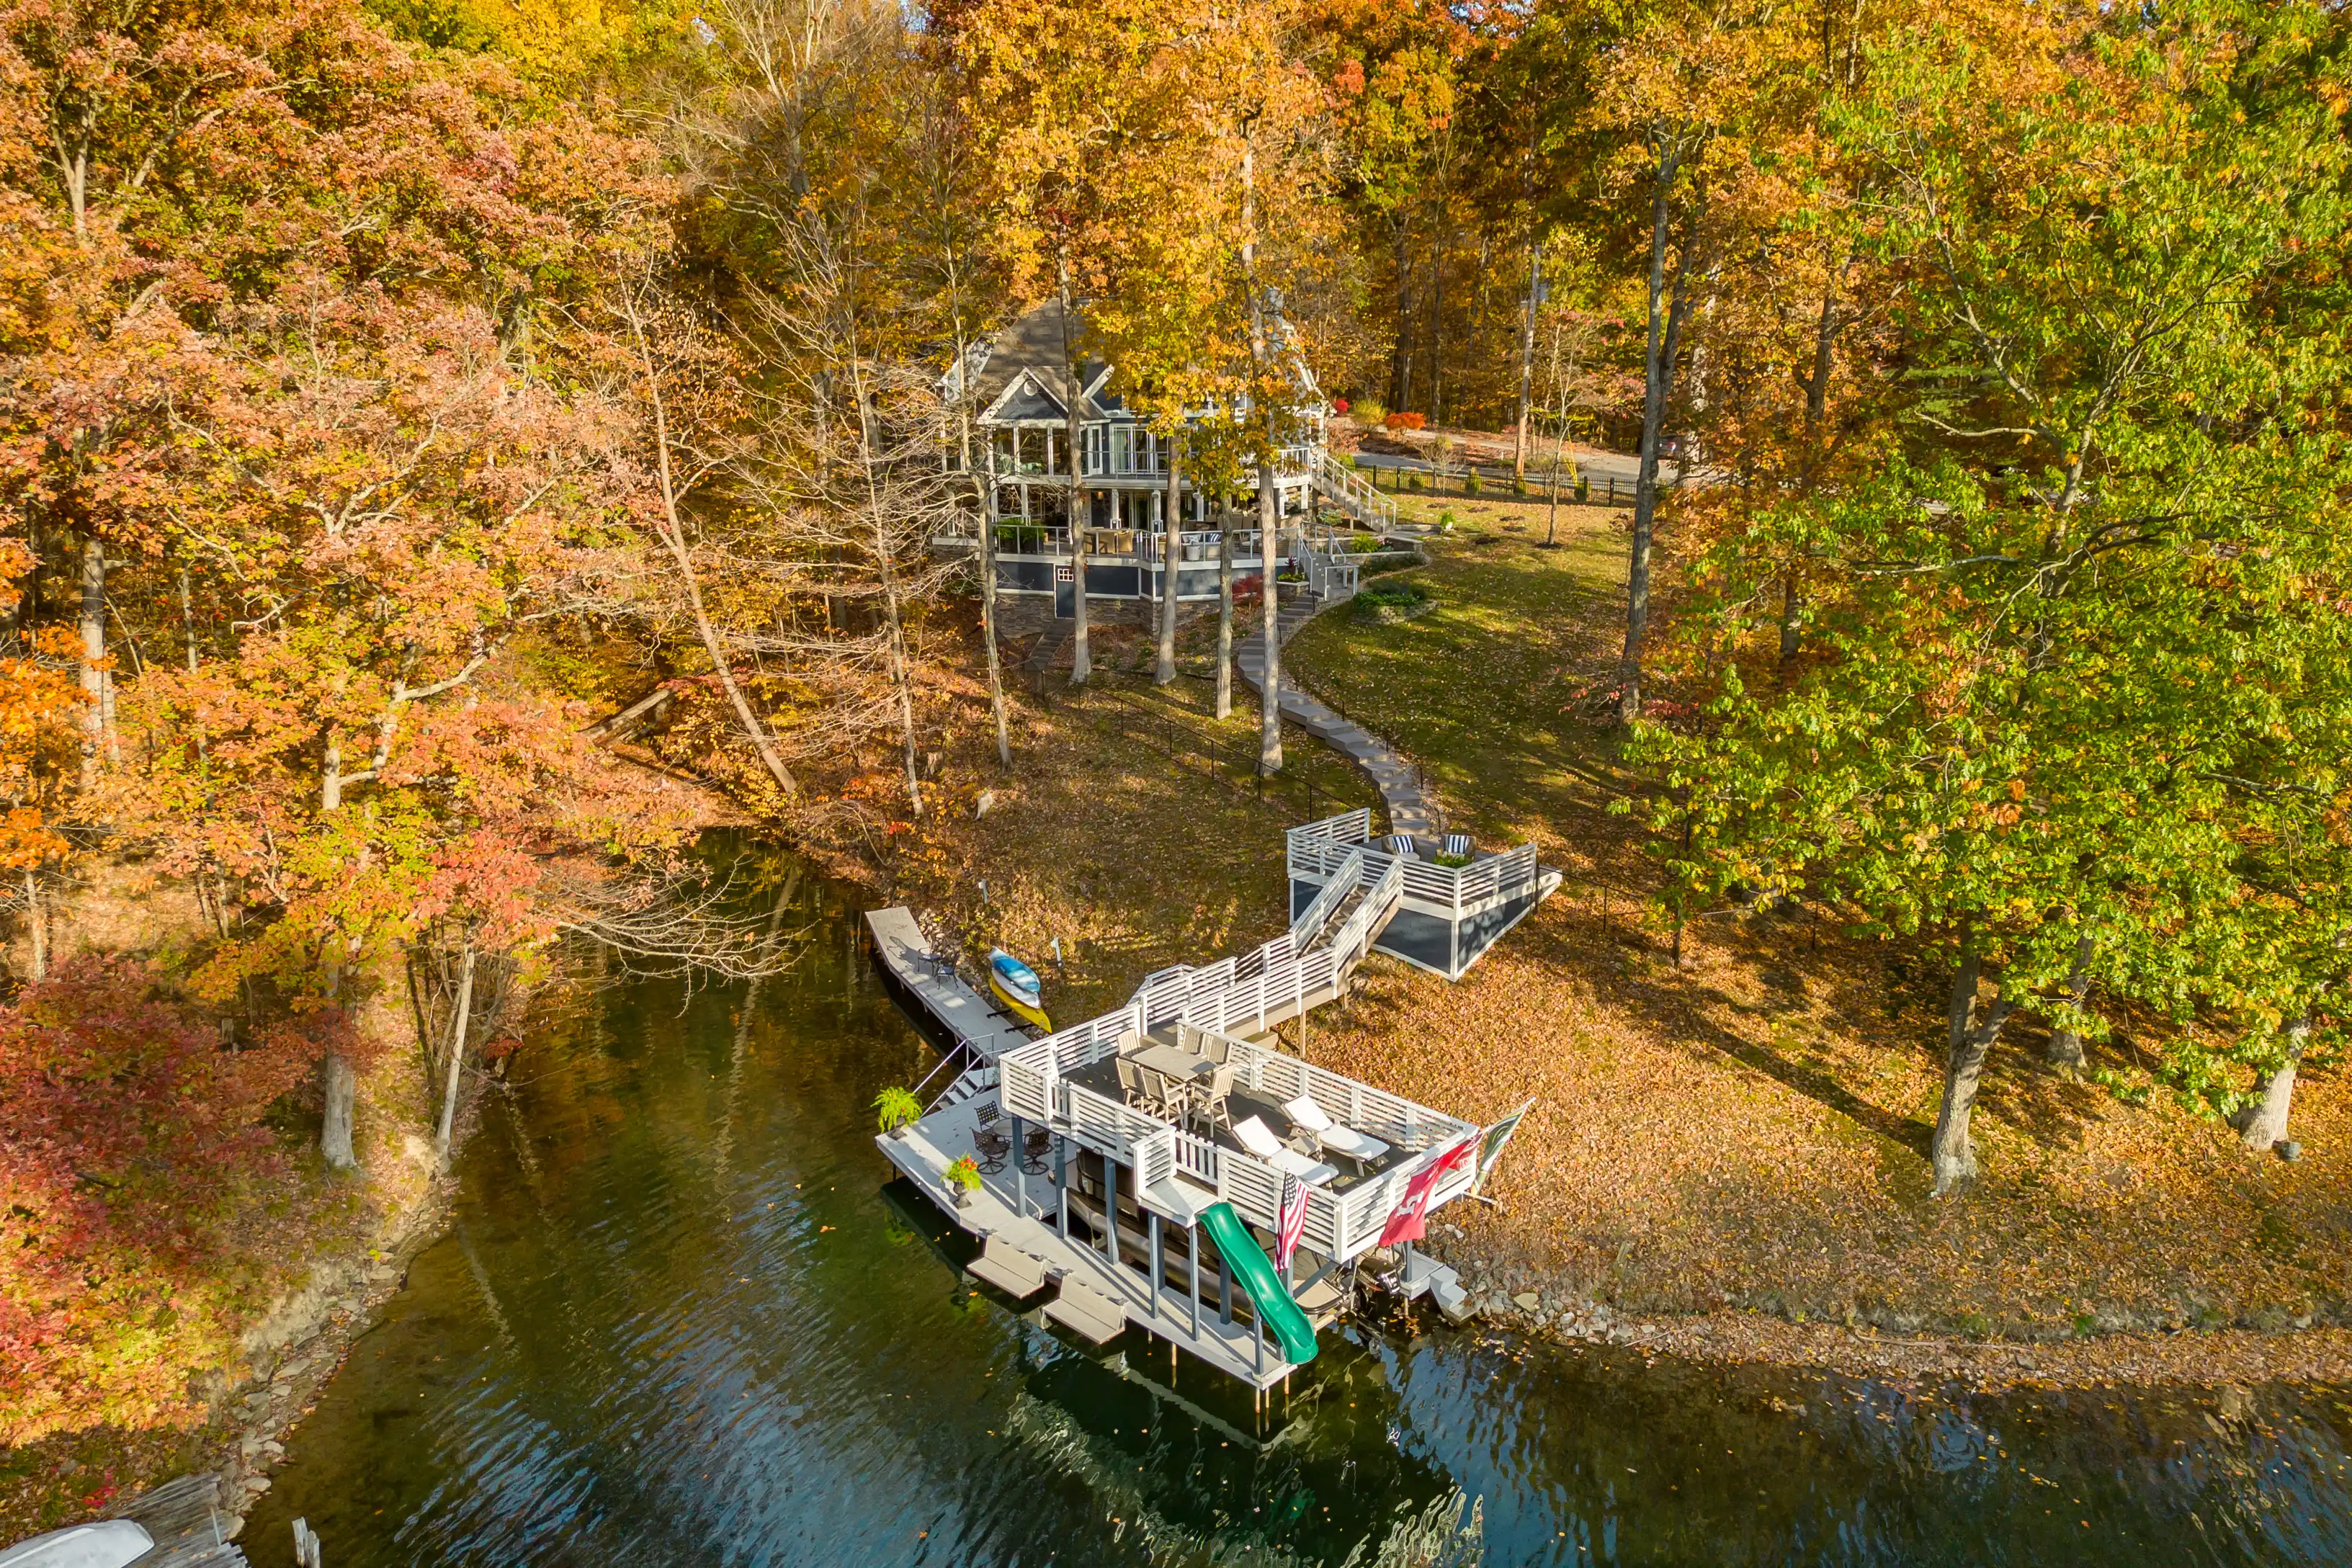 Aerial view of a lakeside house with a dock during autumn, surrounded by trees with colorful foliage.